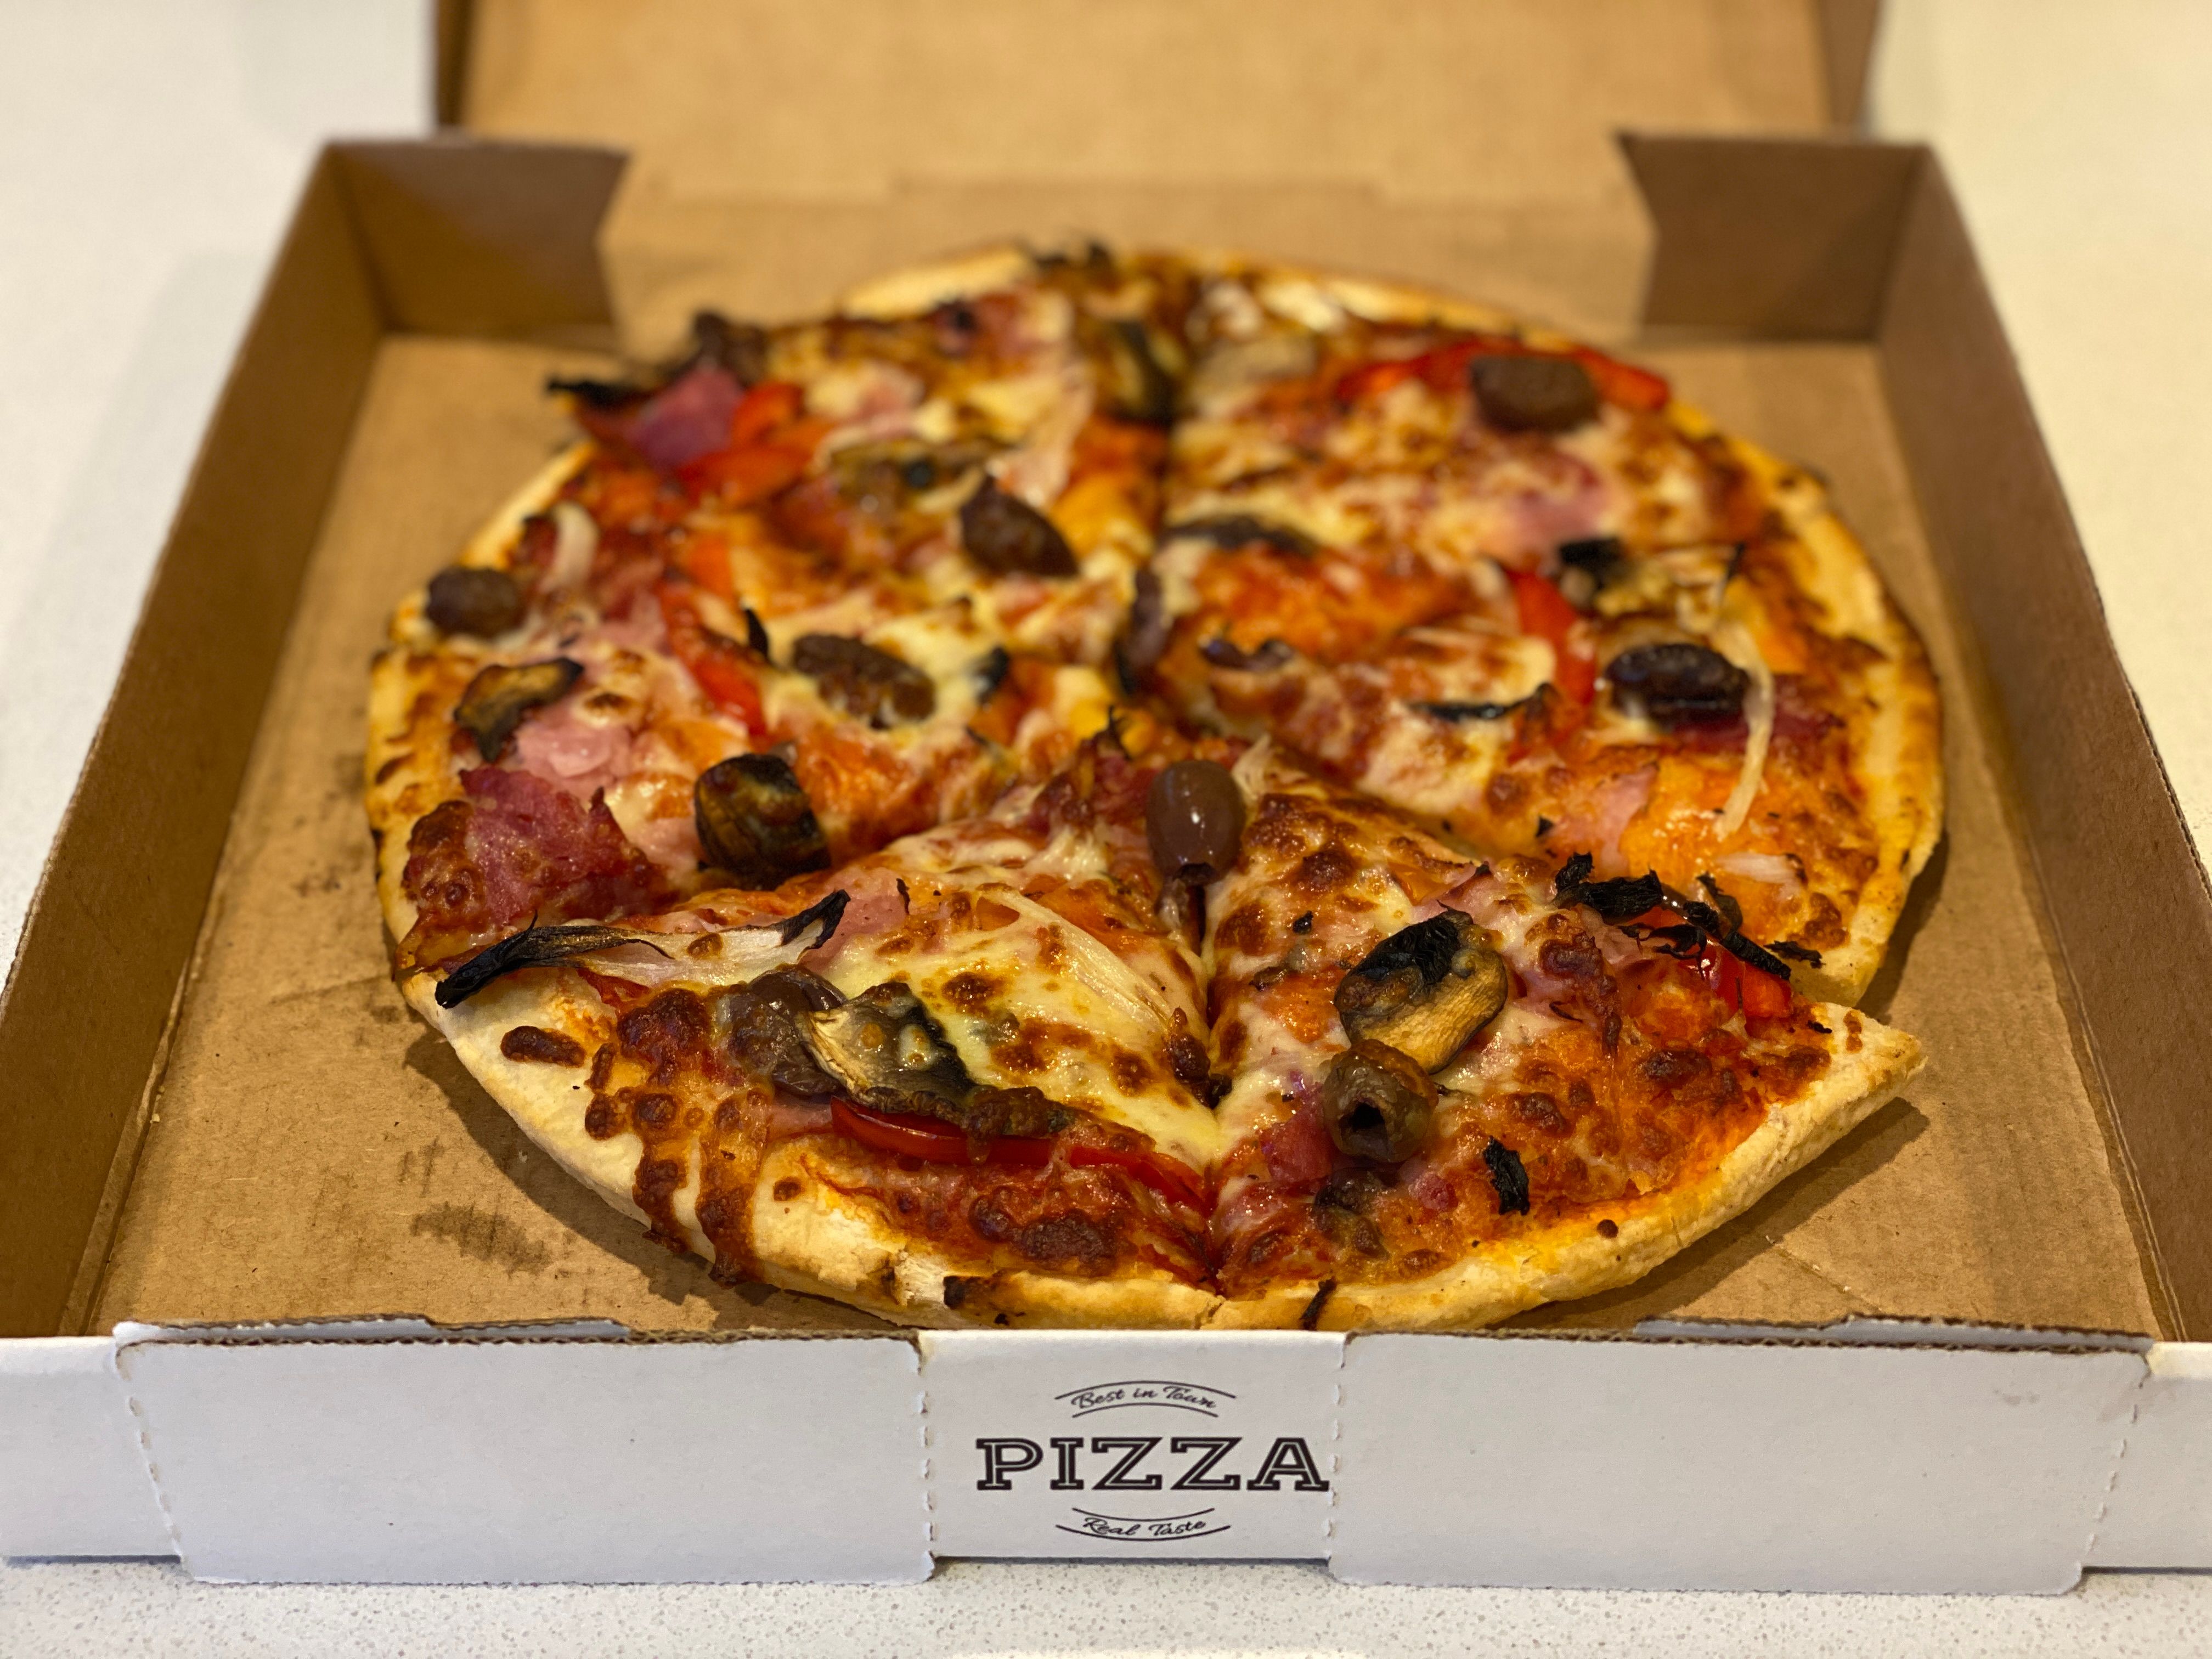 A photo of a medium-sized pizza in a cardbox takeaway pizza box. It's got ham, mushrooms, capsicum, and olives on top in addition to the standard cheese.